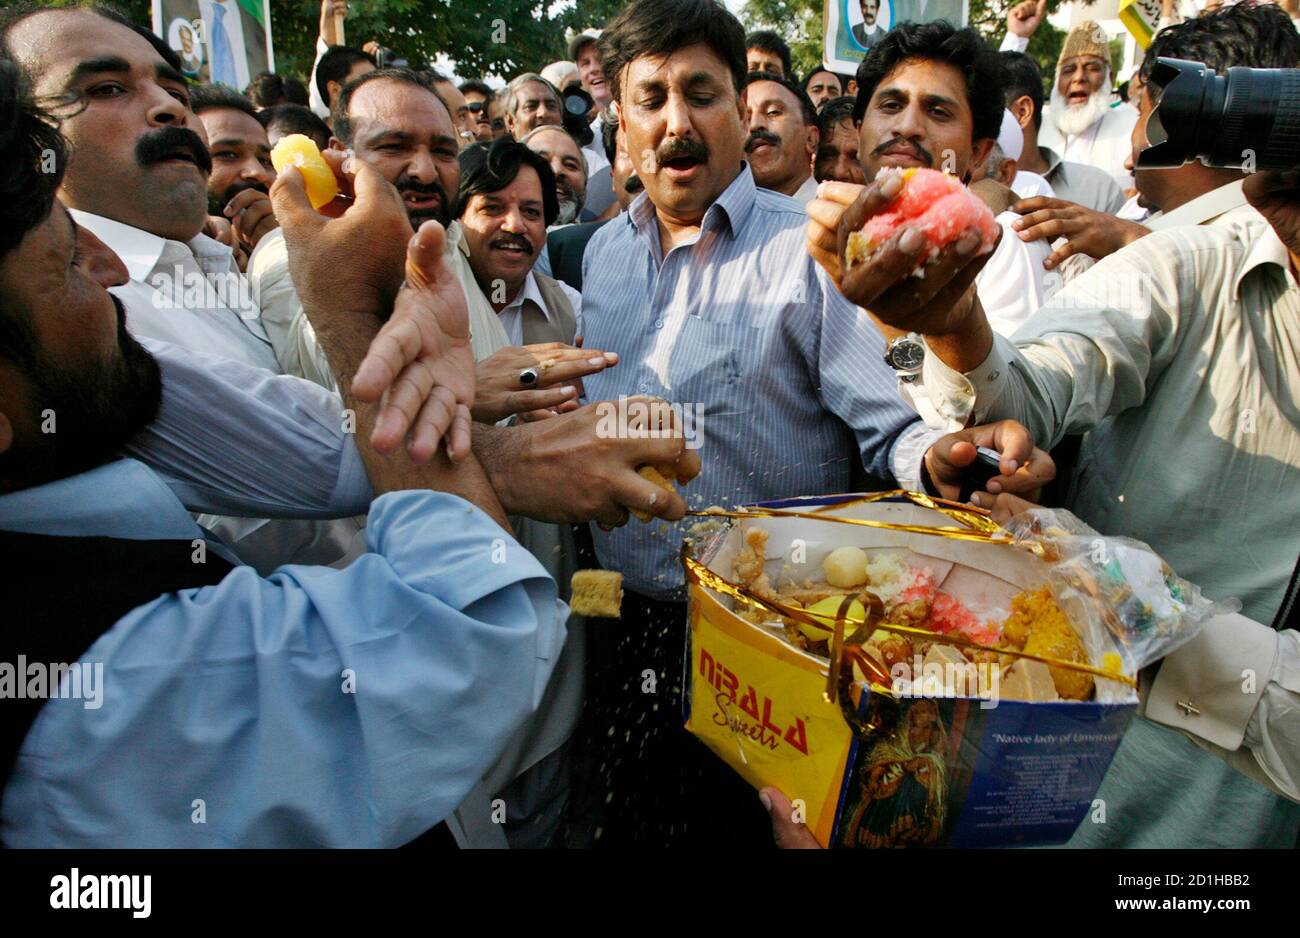 supporters-of-pakistans-exiled-former-prime-minister-nawaz-sharif-eat-sweets-as-they-celebrate-outside-the-supreme-court-building-in-islamabad-august-23-2007-sharif-said-on-thursday-he-intended-to-return-home-as-soon-as-possible-and-contest-elections-to-try-to-oust-president-pervez-musharraf-from-office-reutersmian-khursheed-pakistan-2D1HBB2.jpg